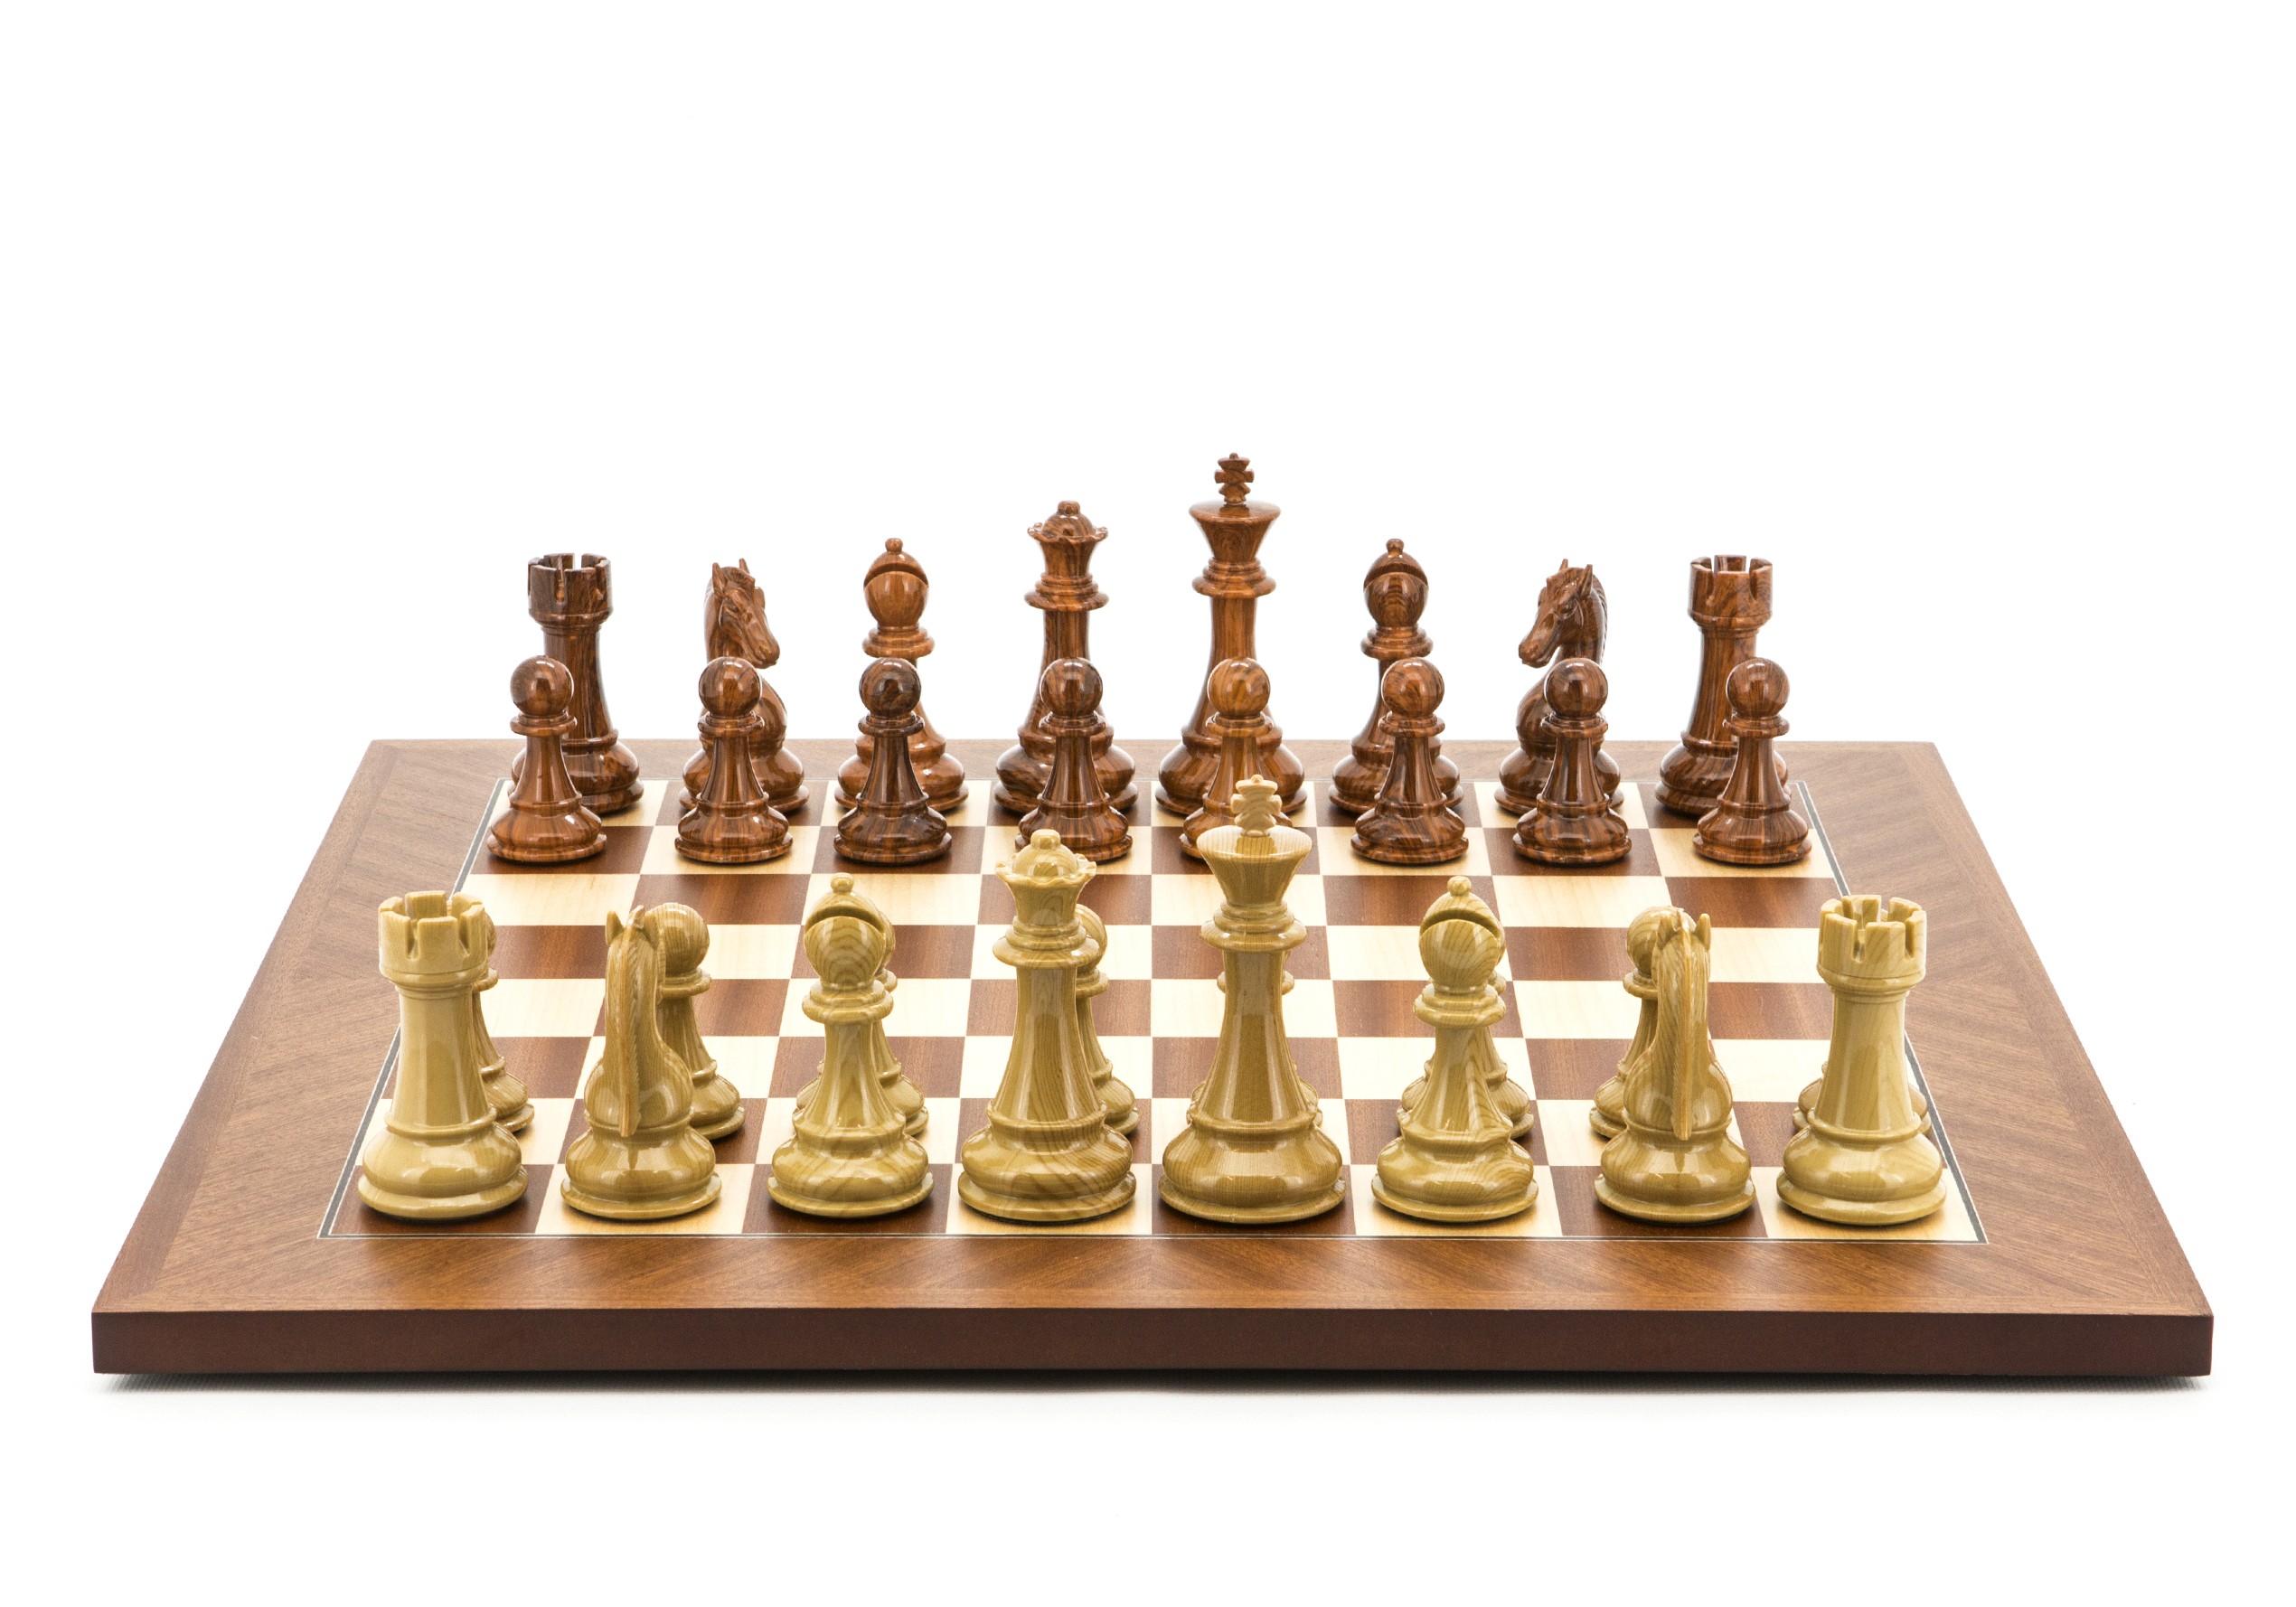 Dal Rossi Italy Chess Set Mahogany Maple Flat Board 50cm, Brown and Box Wood Grain Finish 110mm Chess Pieces